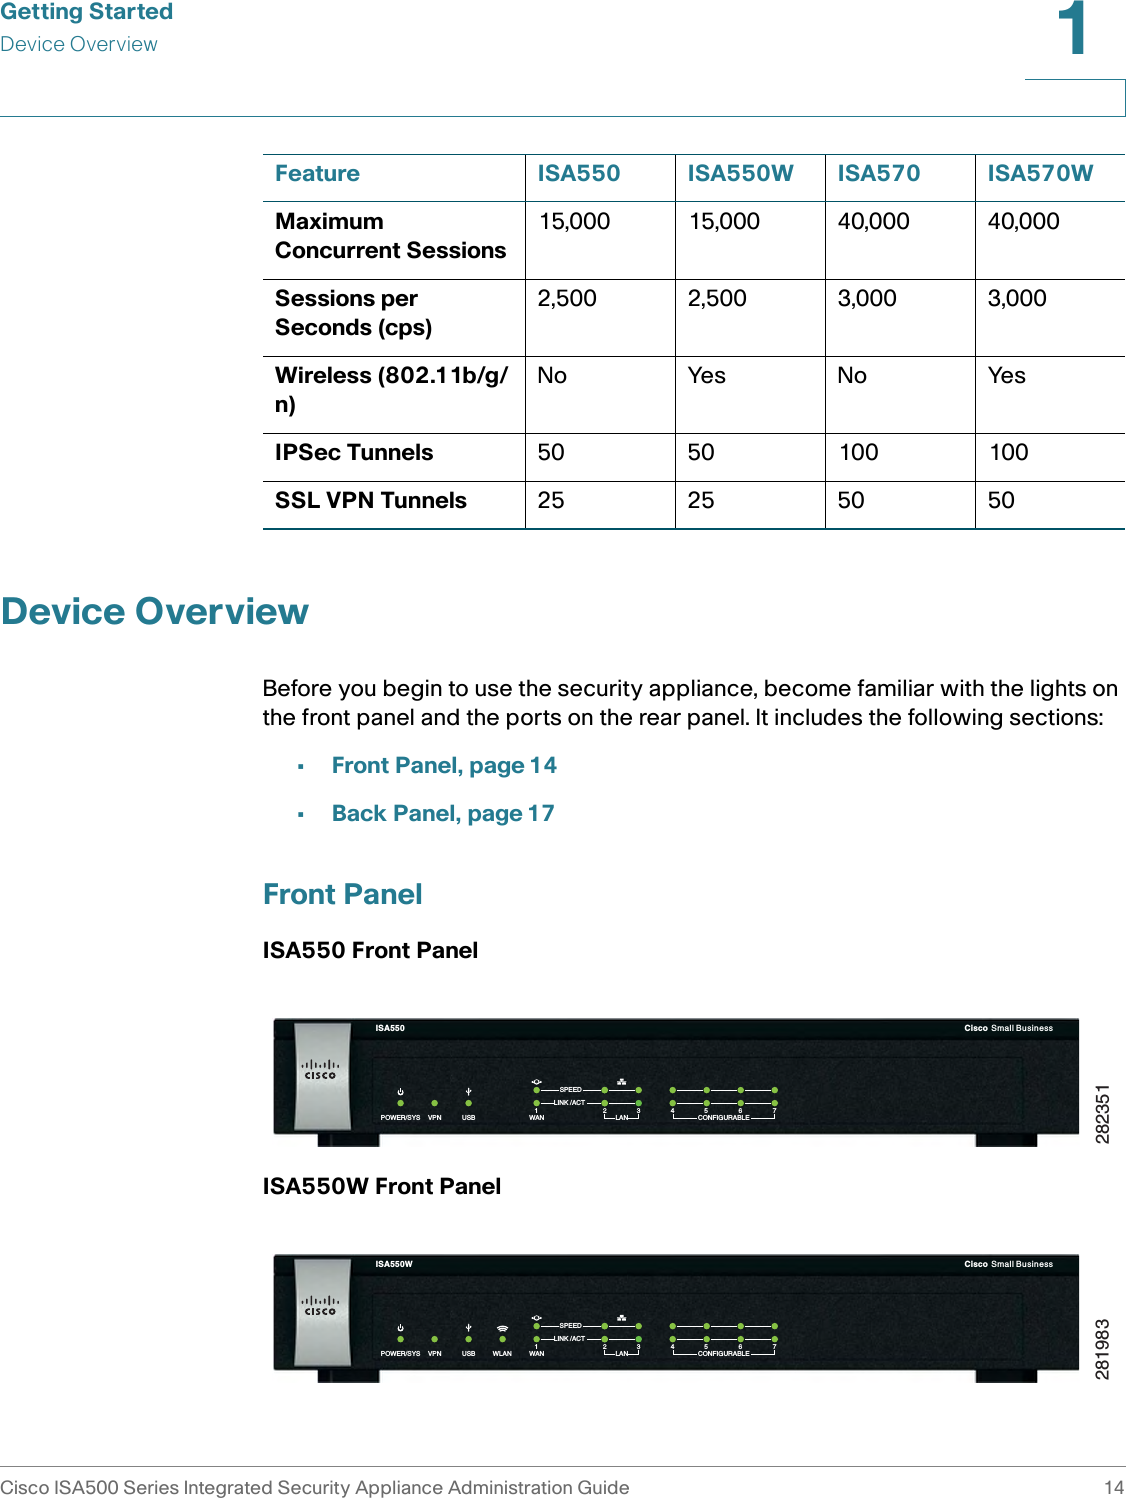 Getting StartedDevice OverviewCisco ISA500 Series Integrated Security Appliance Administration Guide 141 Device OverviewBefore you begin to use the security appliance, become familiar with the lights on the front panel and the ports on the rear panel. It includes the following sections: •Front Panel, page 14•Back Panel, page 17Front PanelISA550 Front PanelISA550W Front PanelMaximum Concurrent Sessions15,000 15,000 40,000 40,000Sessions per Seconds (cps)2,500 2,500 3,000 3,000Wireless (802.11b/g/n)No Yes No YesIPSec Tunnels 50 50 100 100SSL VPN Tunnels 25 25 50 50Feature ISA550 ISA550W ISA570 ISA570W282351Small Business1VPN USB WAN LAN CONFIGURABLEPOWER/SYSSPEEDLINK /ACT234567ISA550 Cisco281983Small Business1VPN USB WAN LAN CONFIGURABLEPOWER/SYSSPEEDLINK /ACT234567WLANISA550W Cisco